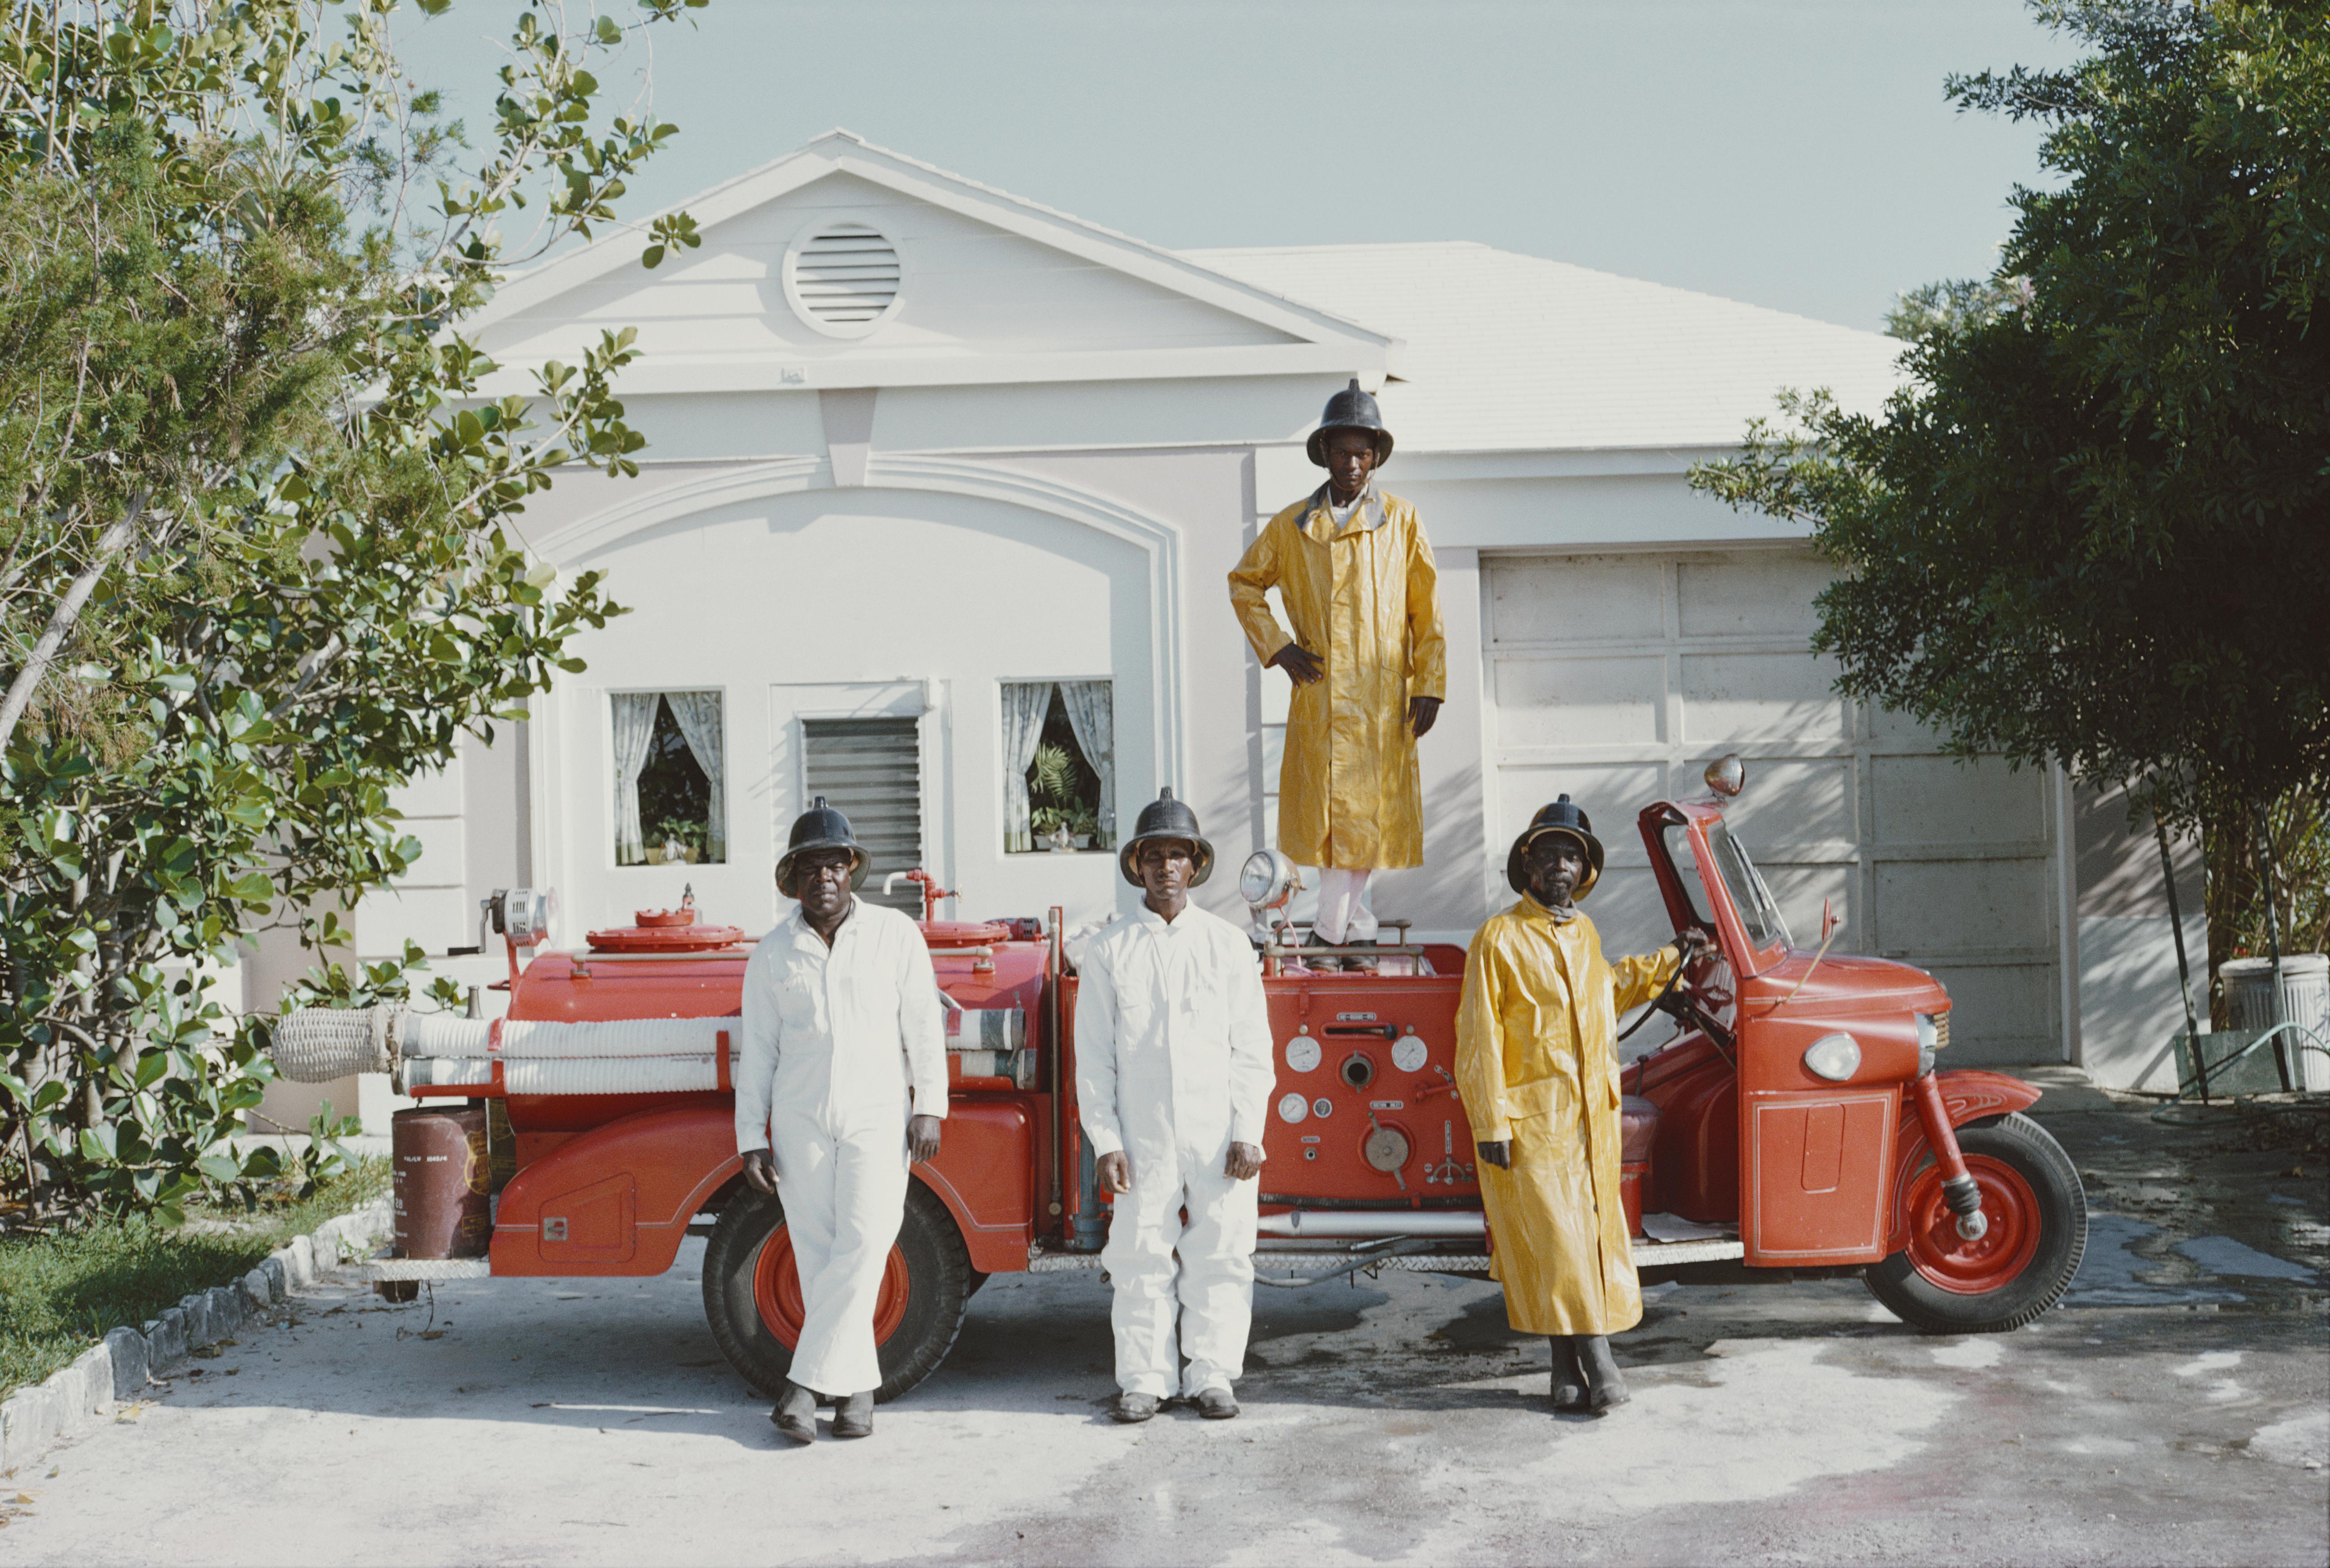 Slim Aarons
Lyford Cay Fire Service, 1966
C print 
Estate stamped and numbered edition of 150 
with Certificate of authenticity

The fire service in Lyford Cay, on New Providence Island in the Bahamas, April 1966.

Slim Aarons (1916-2006) worked